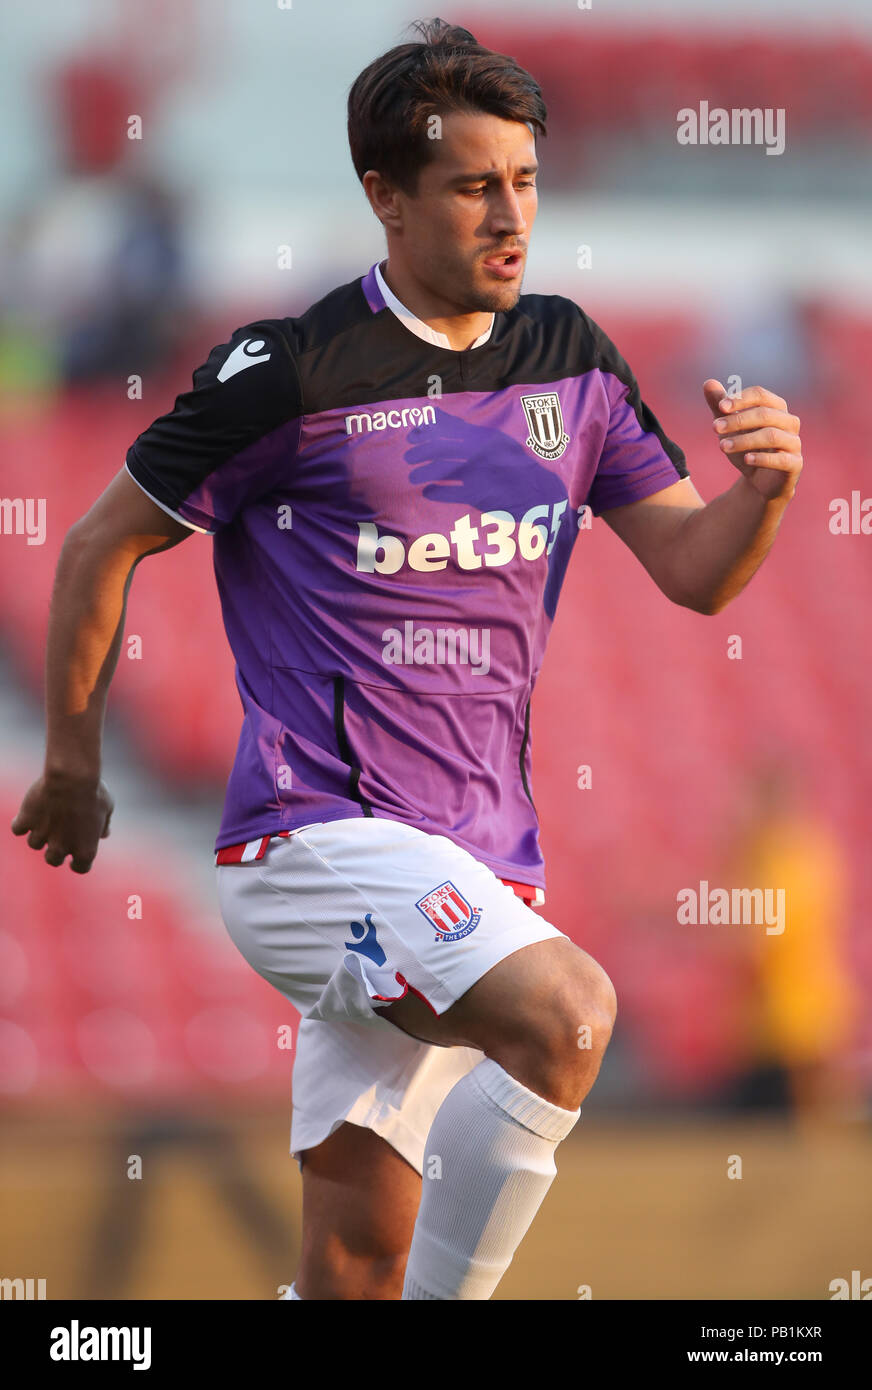 Stoke City's Bojan Krkic during a pre season friendly match at The Bet365 Stadium, Stoke. PRESS ASSOCIATION Photo. Picture date: Wednesday July 25, 2018. Photo credit should read: Nick Potts/PA Wire. EDITORIAL USE ONLY No use with unauthorised audio, video, data, fixture lists, club/league logos or 'live' services. Online in-match use limited to 75 images, no video emulation. No use in betting, games or single club/league/player publications. Stock Photo